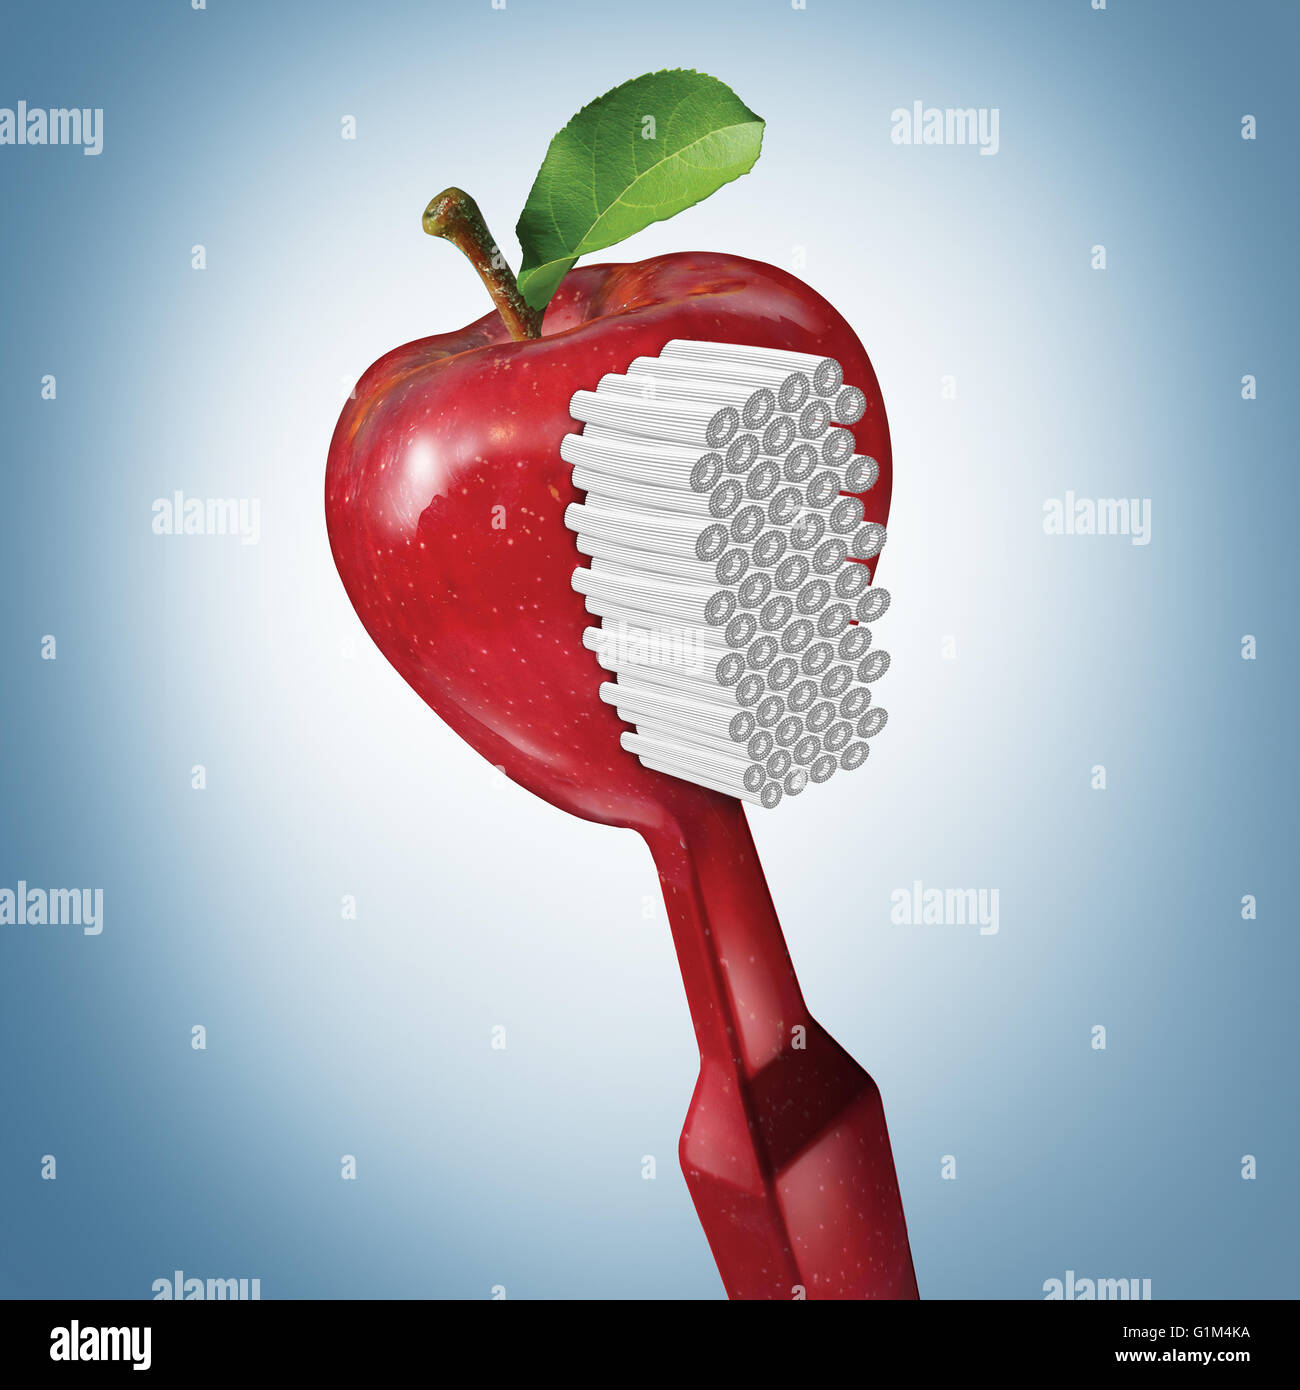 Toothbrush health and brushing as dental oral care with a tooth brush shaped as a red apple as a teeth cleaning symbol with 3D illustration elements. Stock Photo